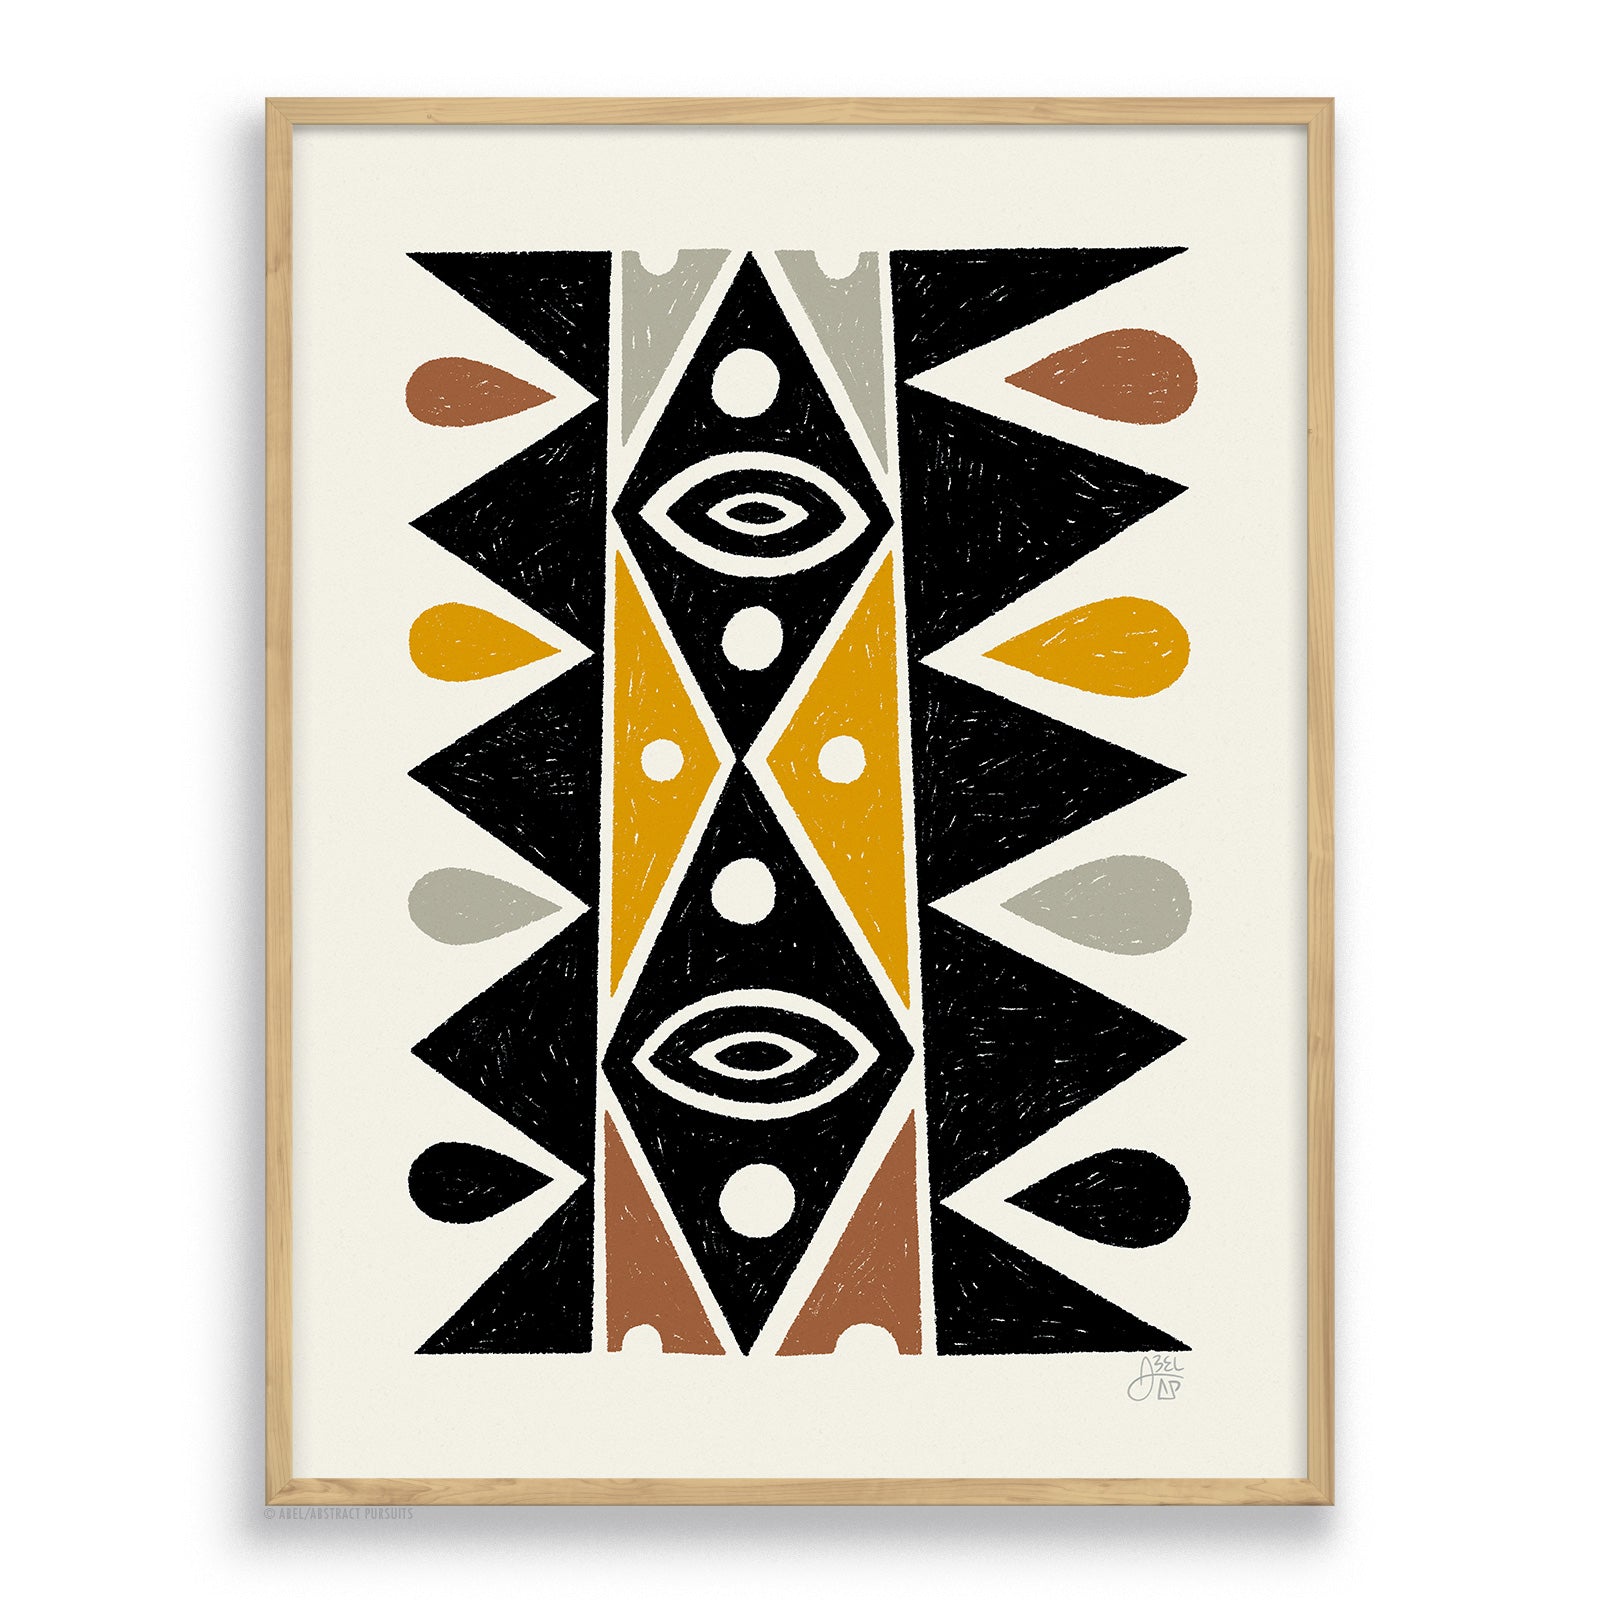 Hickory Framed Black and earth colored totem inspired by mid-century design. Bamboo art print by Erik Abel